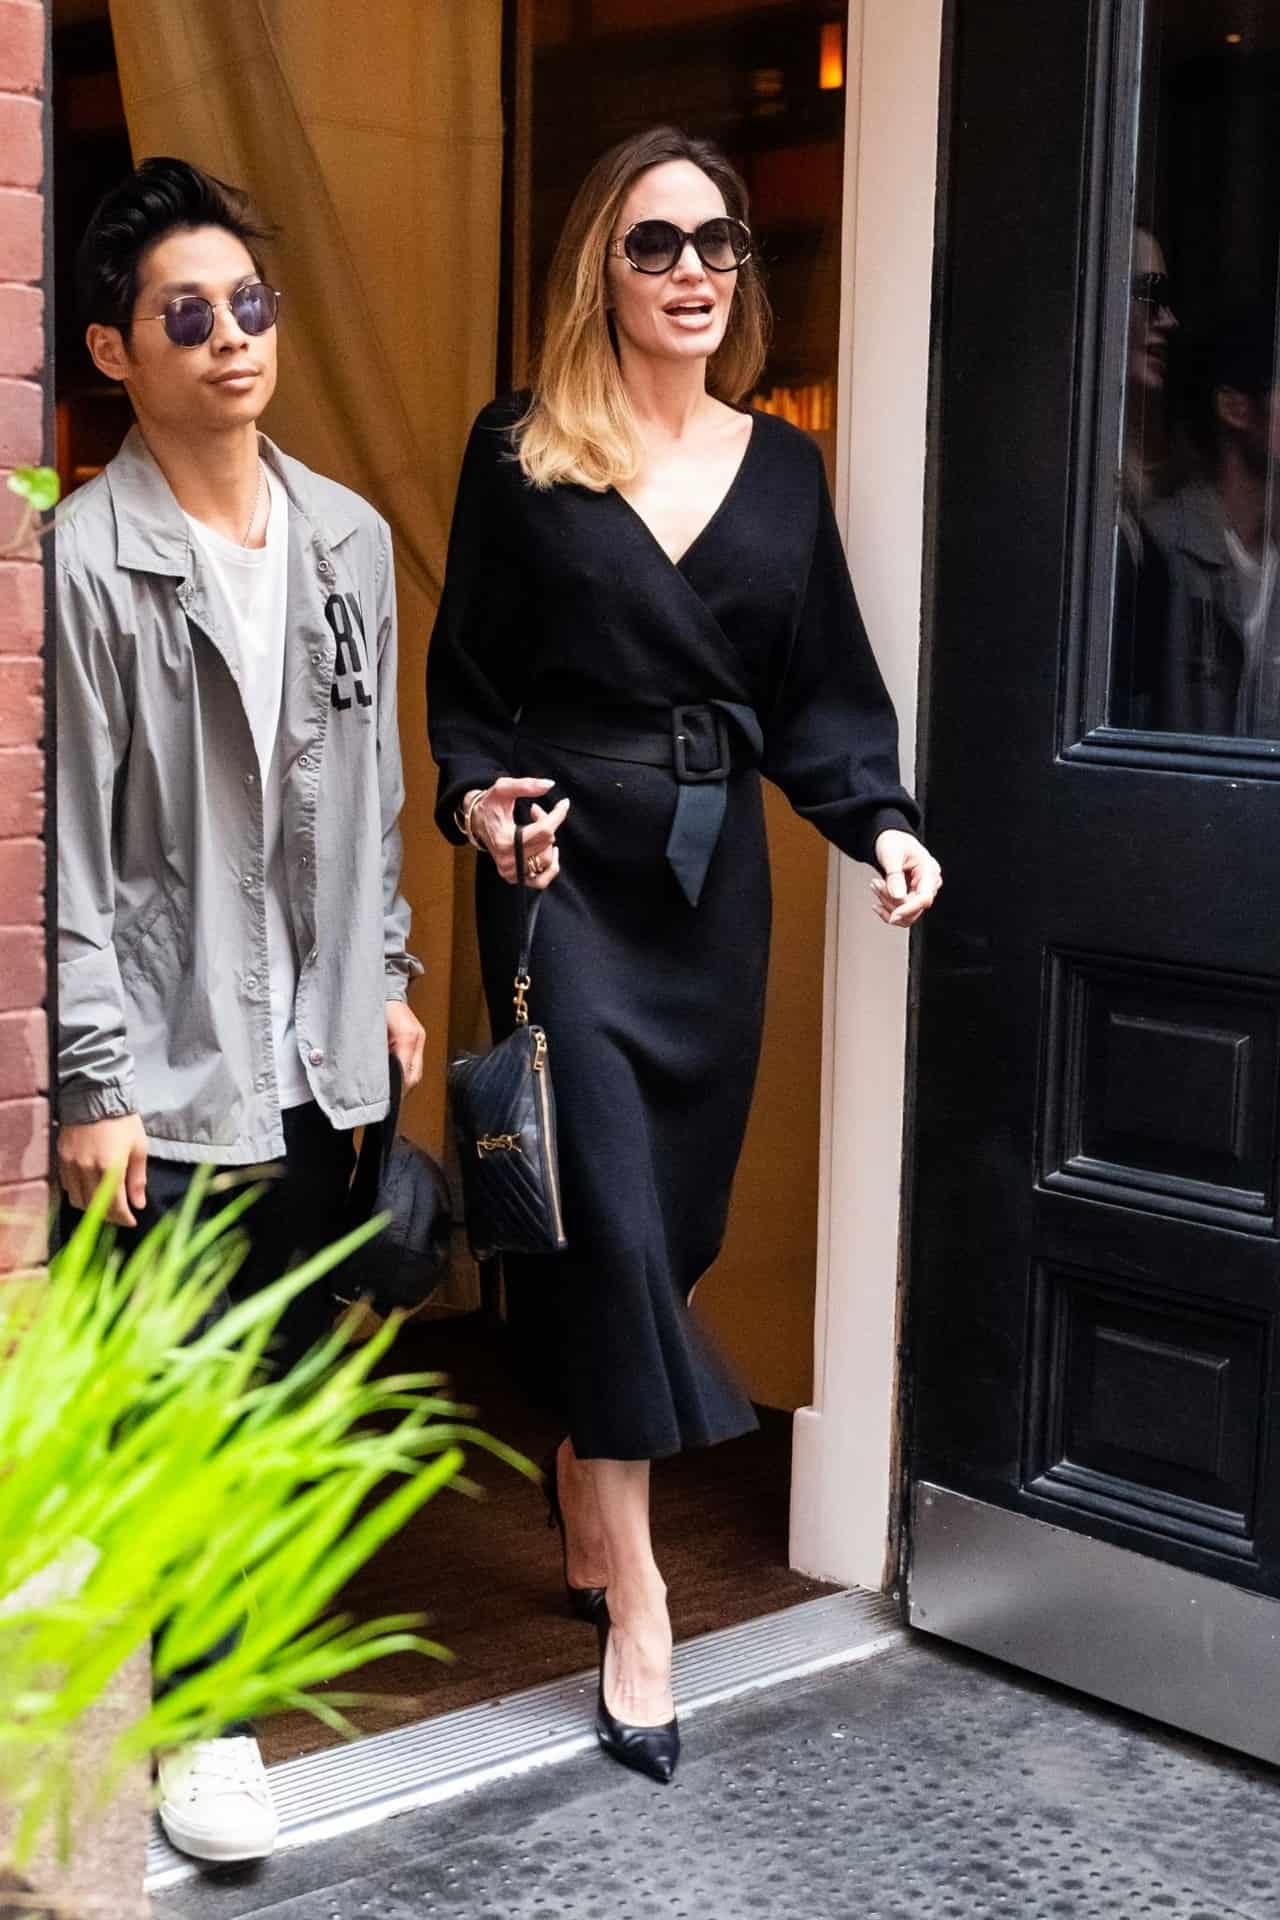 Angelina Jolie Radiates Elegance as She Steps Out with Son Pax in NYC